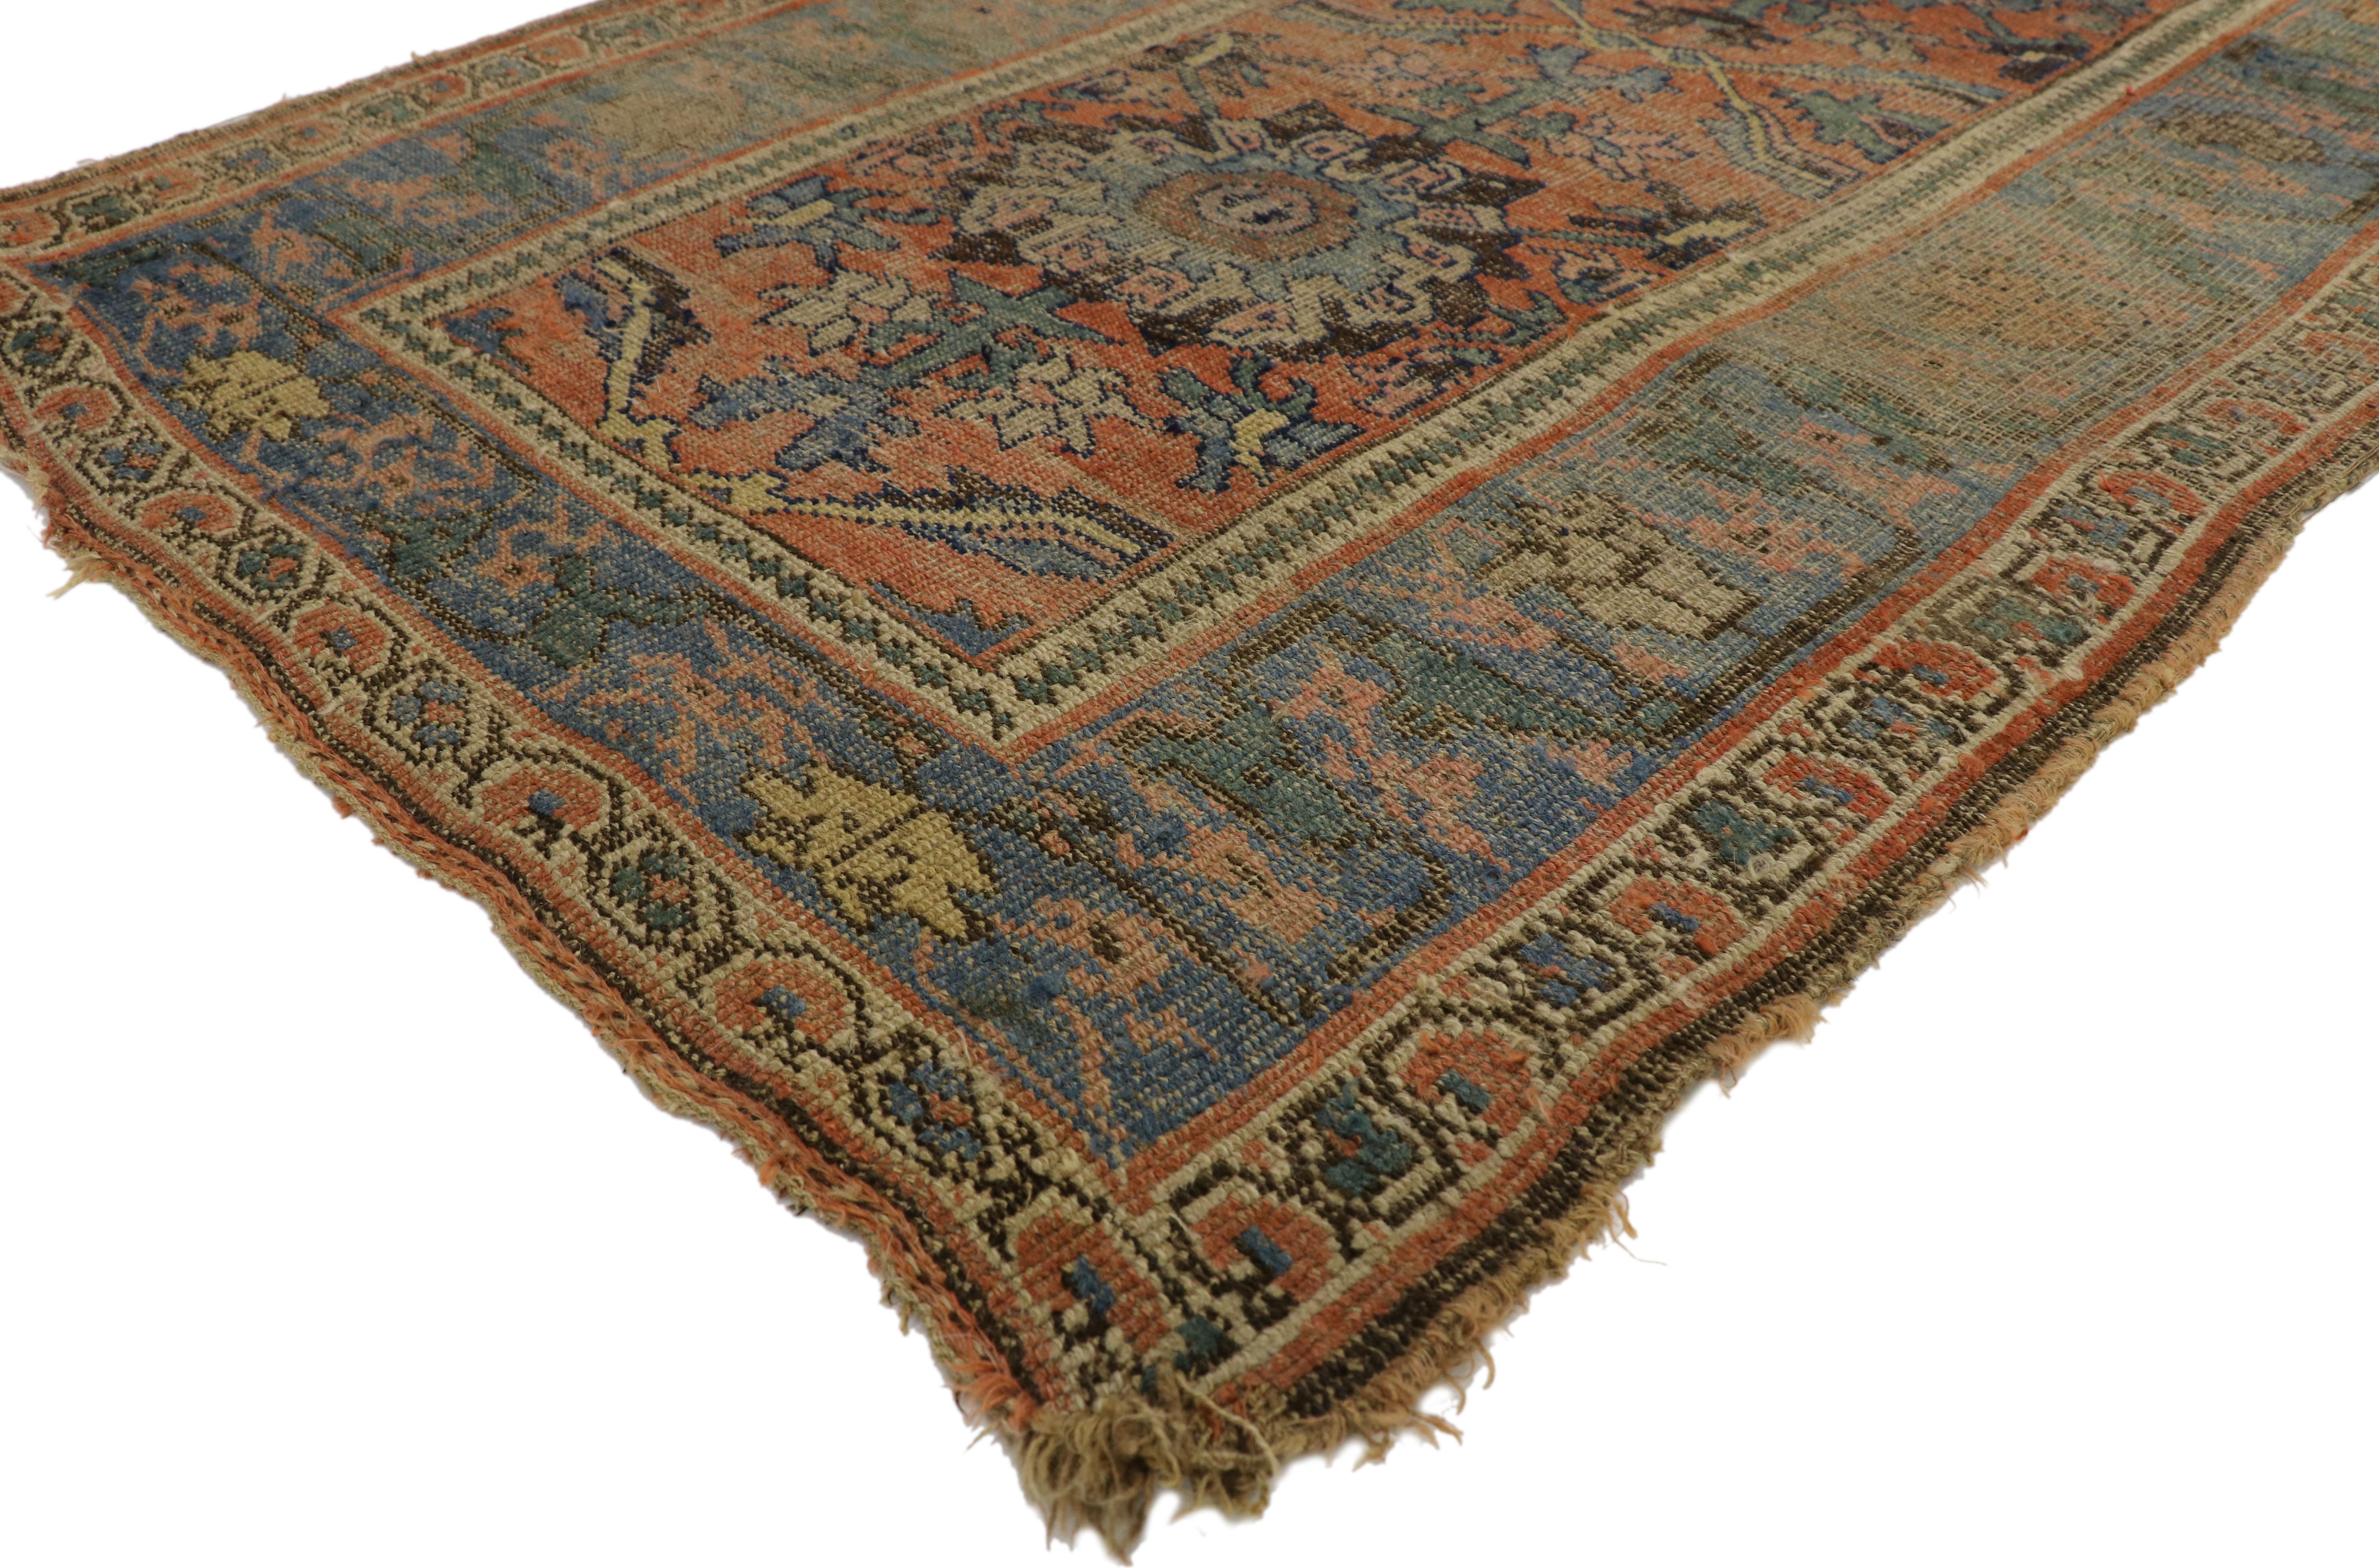 77333 distressed antique Persian Bijar rug with Rustic Belgian Arts & Crafts style. Highlighting modern design aesthetics and subdued elegance with a pop of color, this antique Bidjar rug beautifully embodies rustic Belgian style. This hand knotted